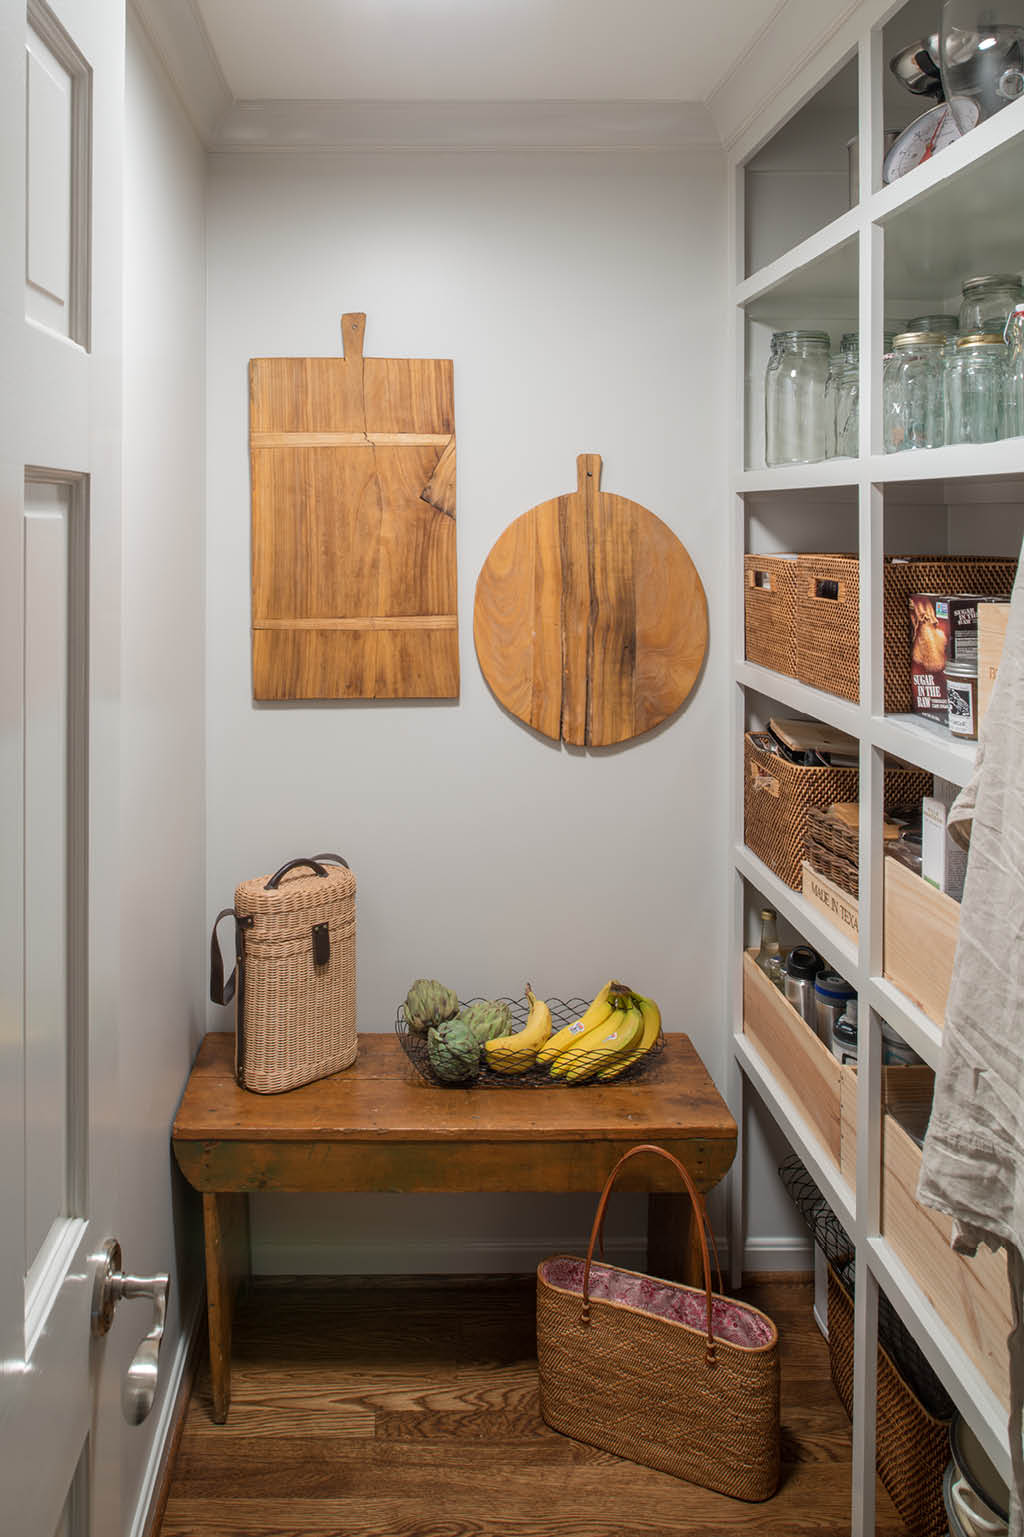 kitchen pantry with wooden bench